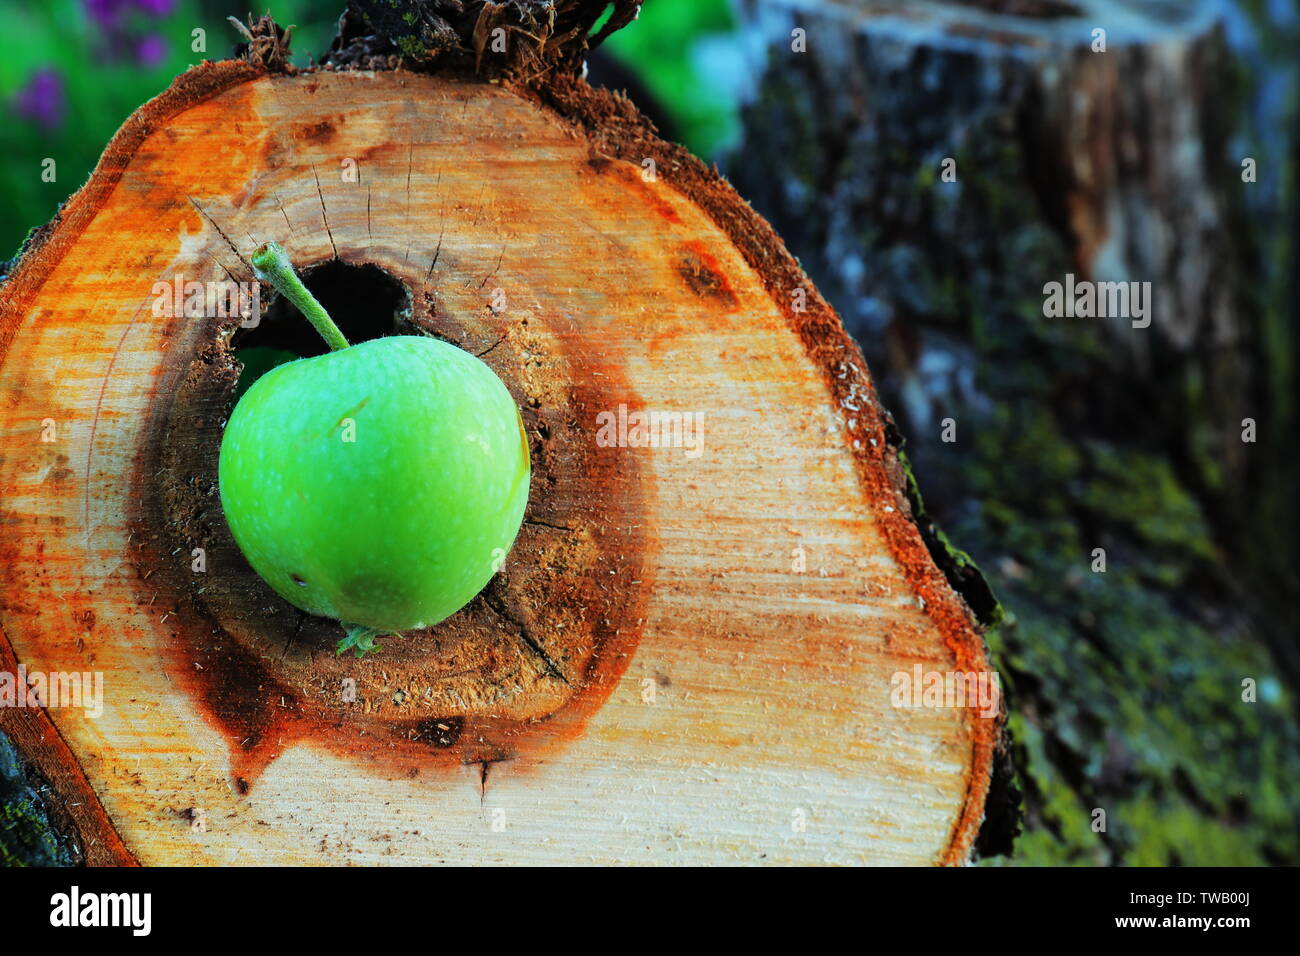 Apple inside the hollow core of a sawed-off apple tree branch Stock Photo